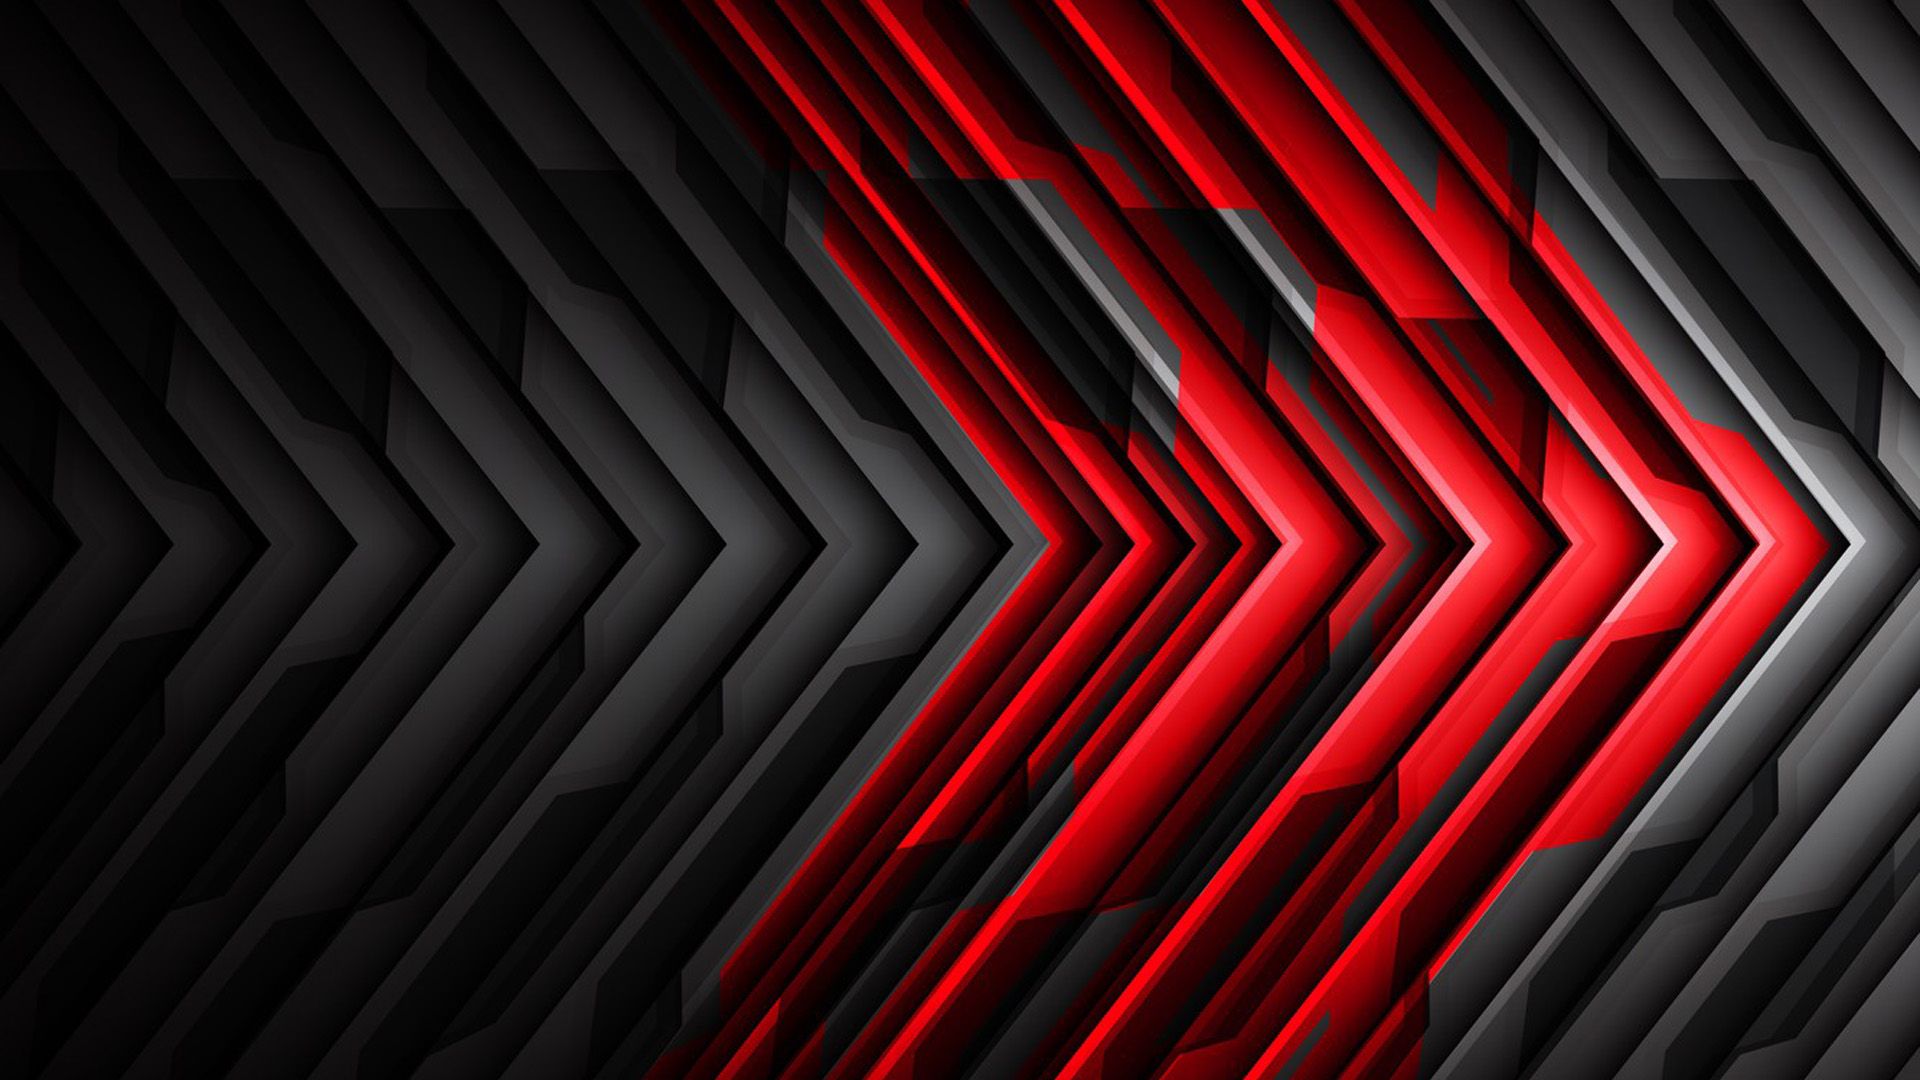 Red and black abstract technology background with arrows. - Design